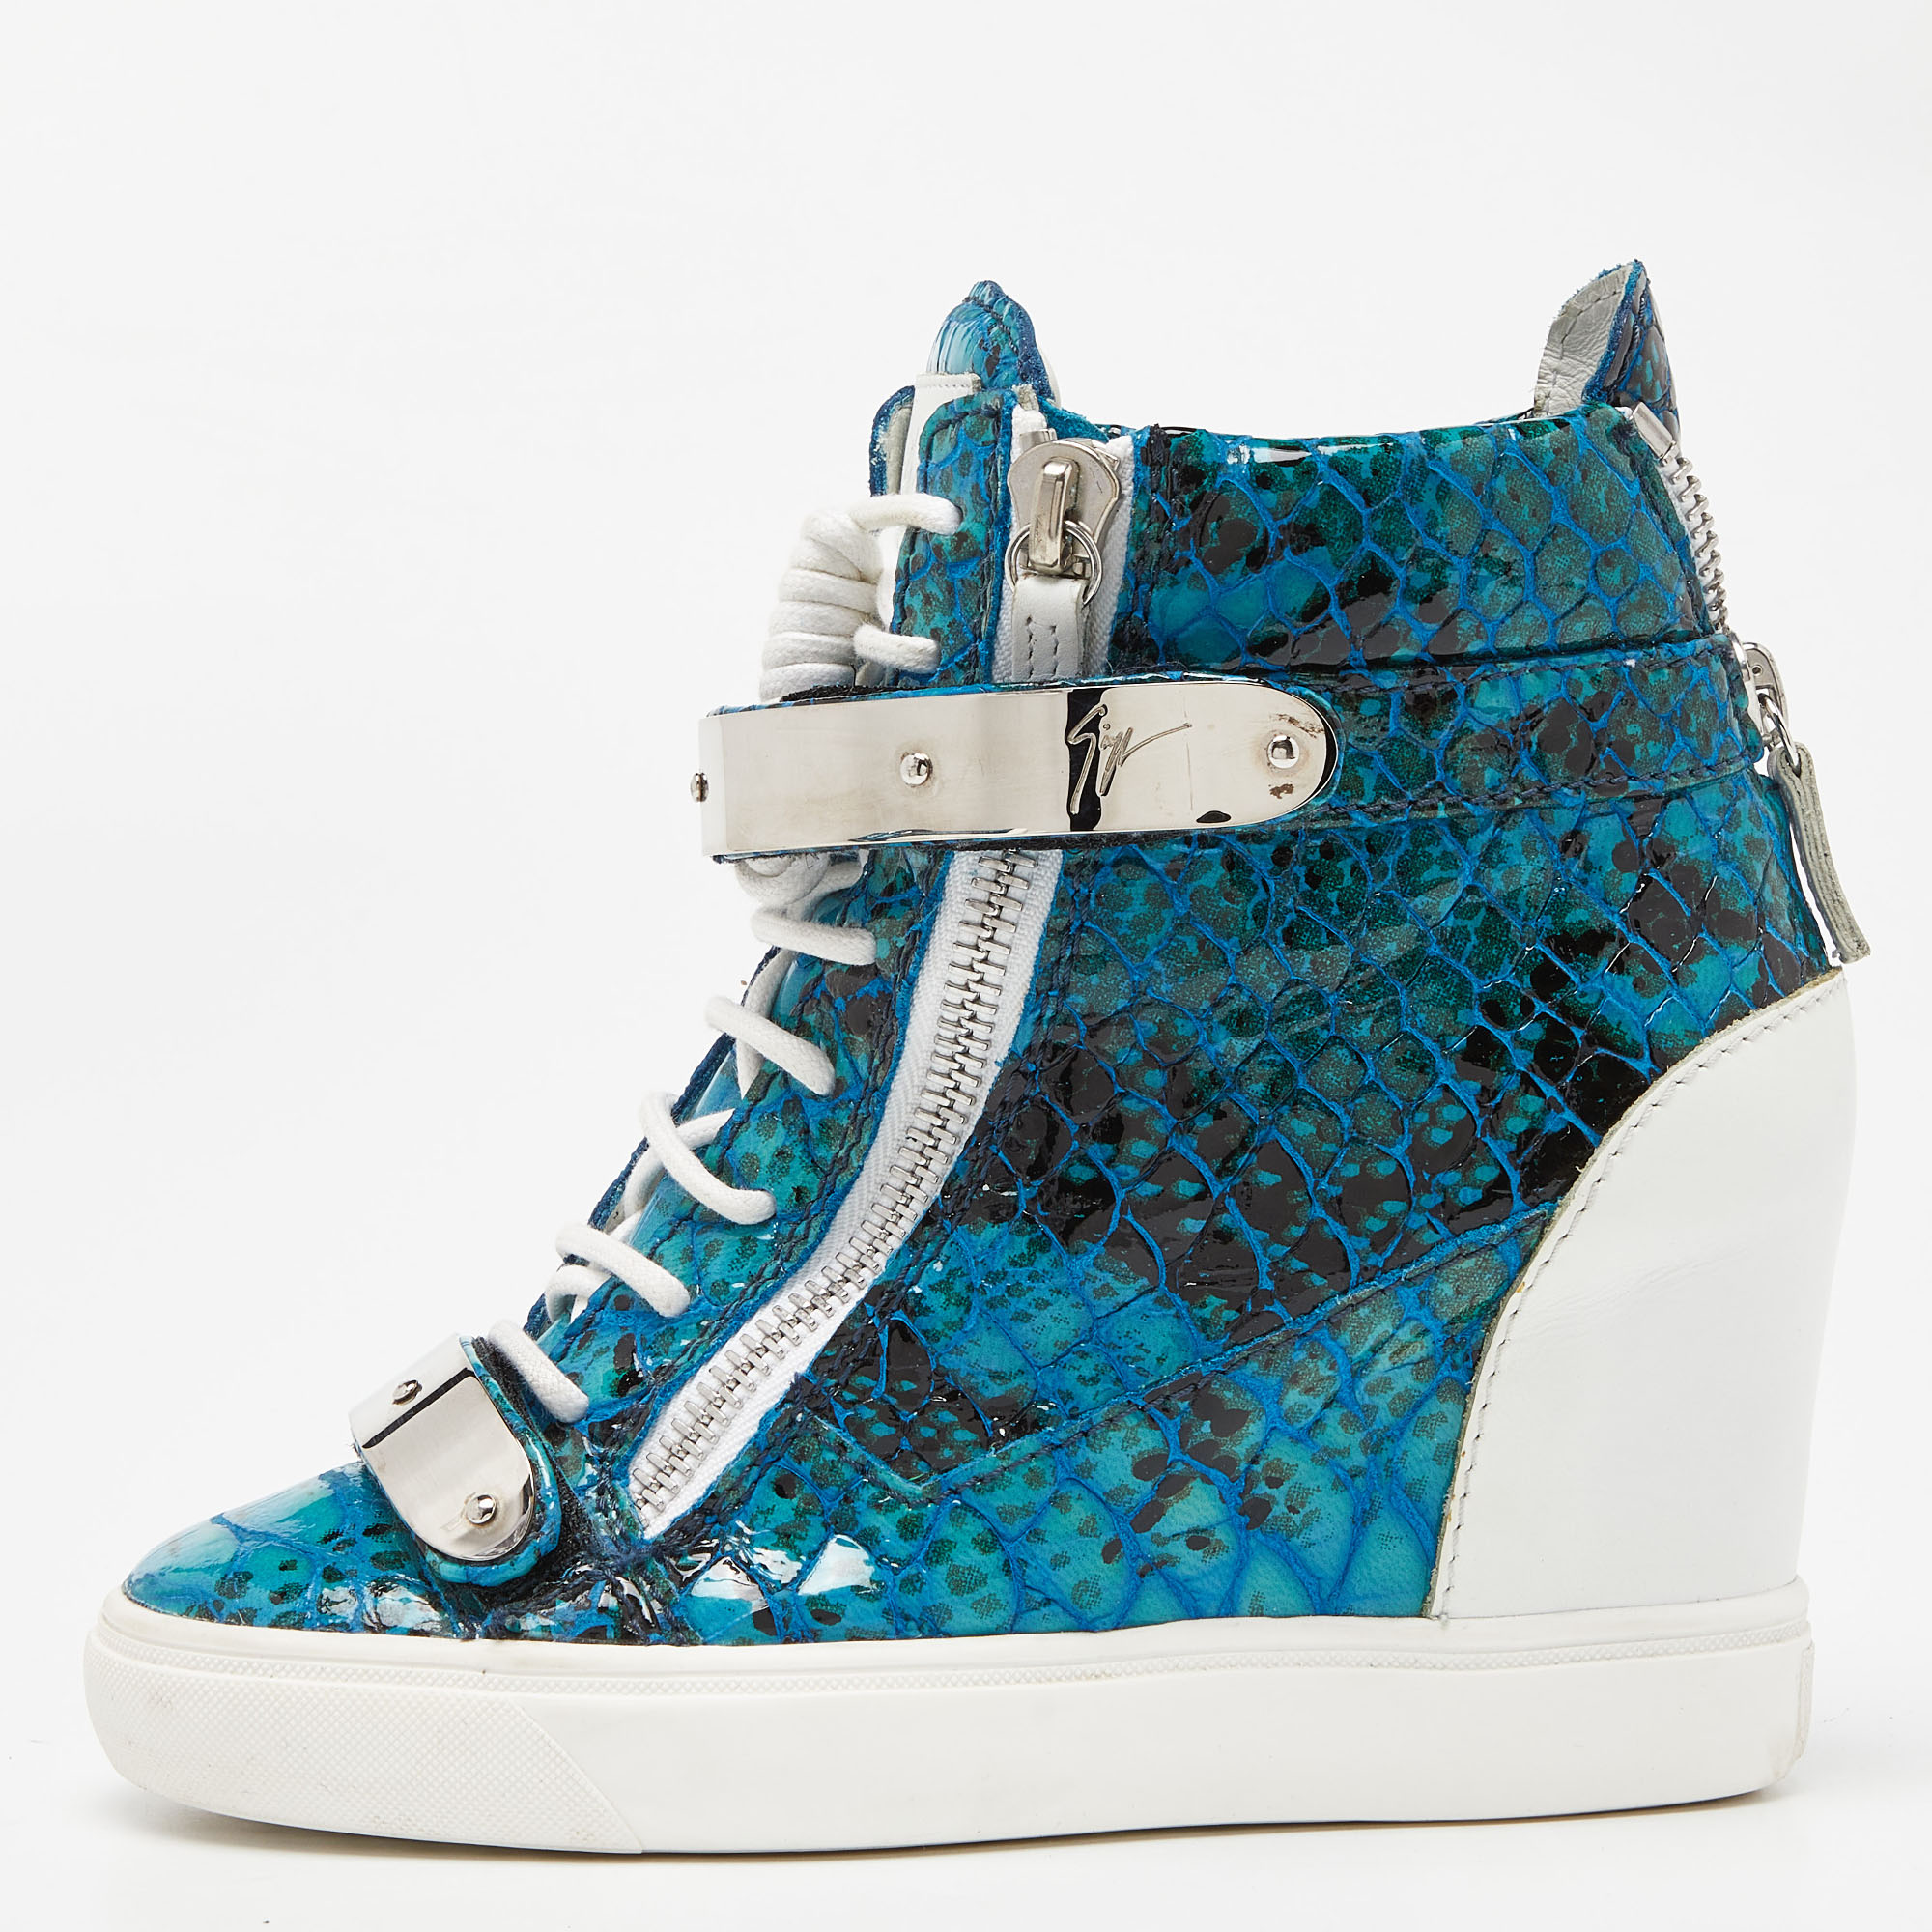 Give your outfit a luxe update with this pair of Giuseppe Zanotti wedge sneakers. The creation is sewn perfectly to help you make a statement in them for a long time.